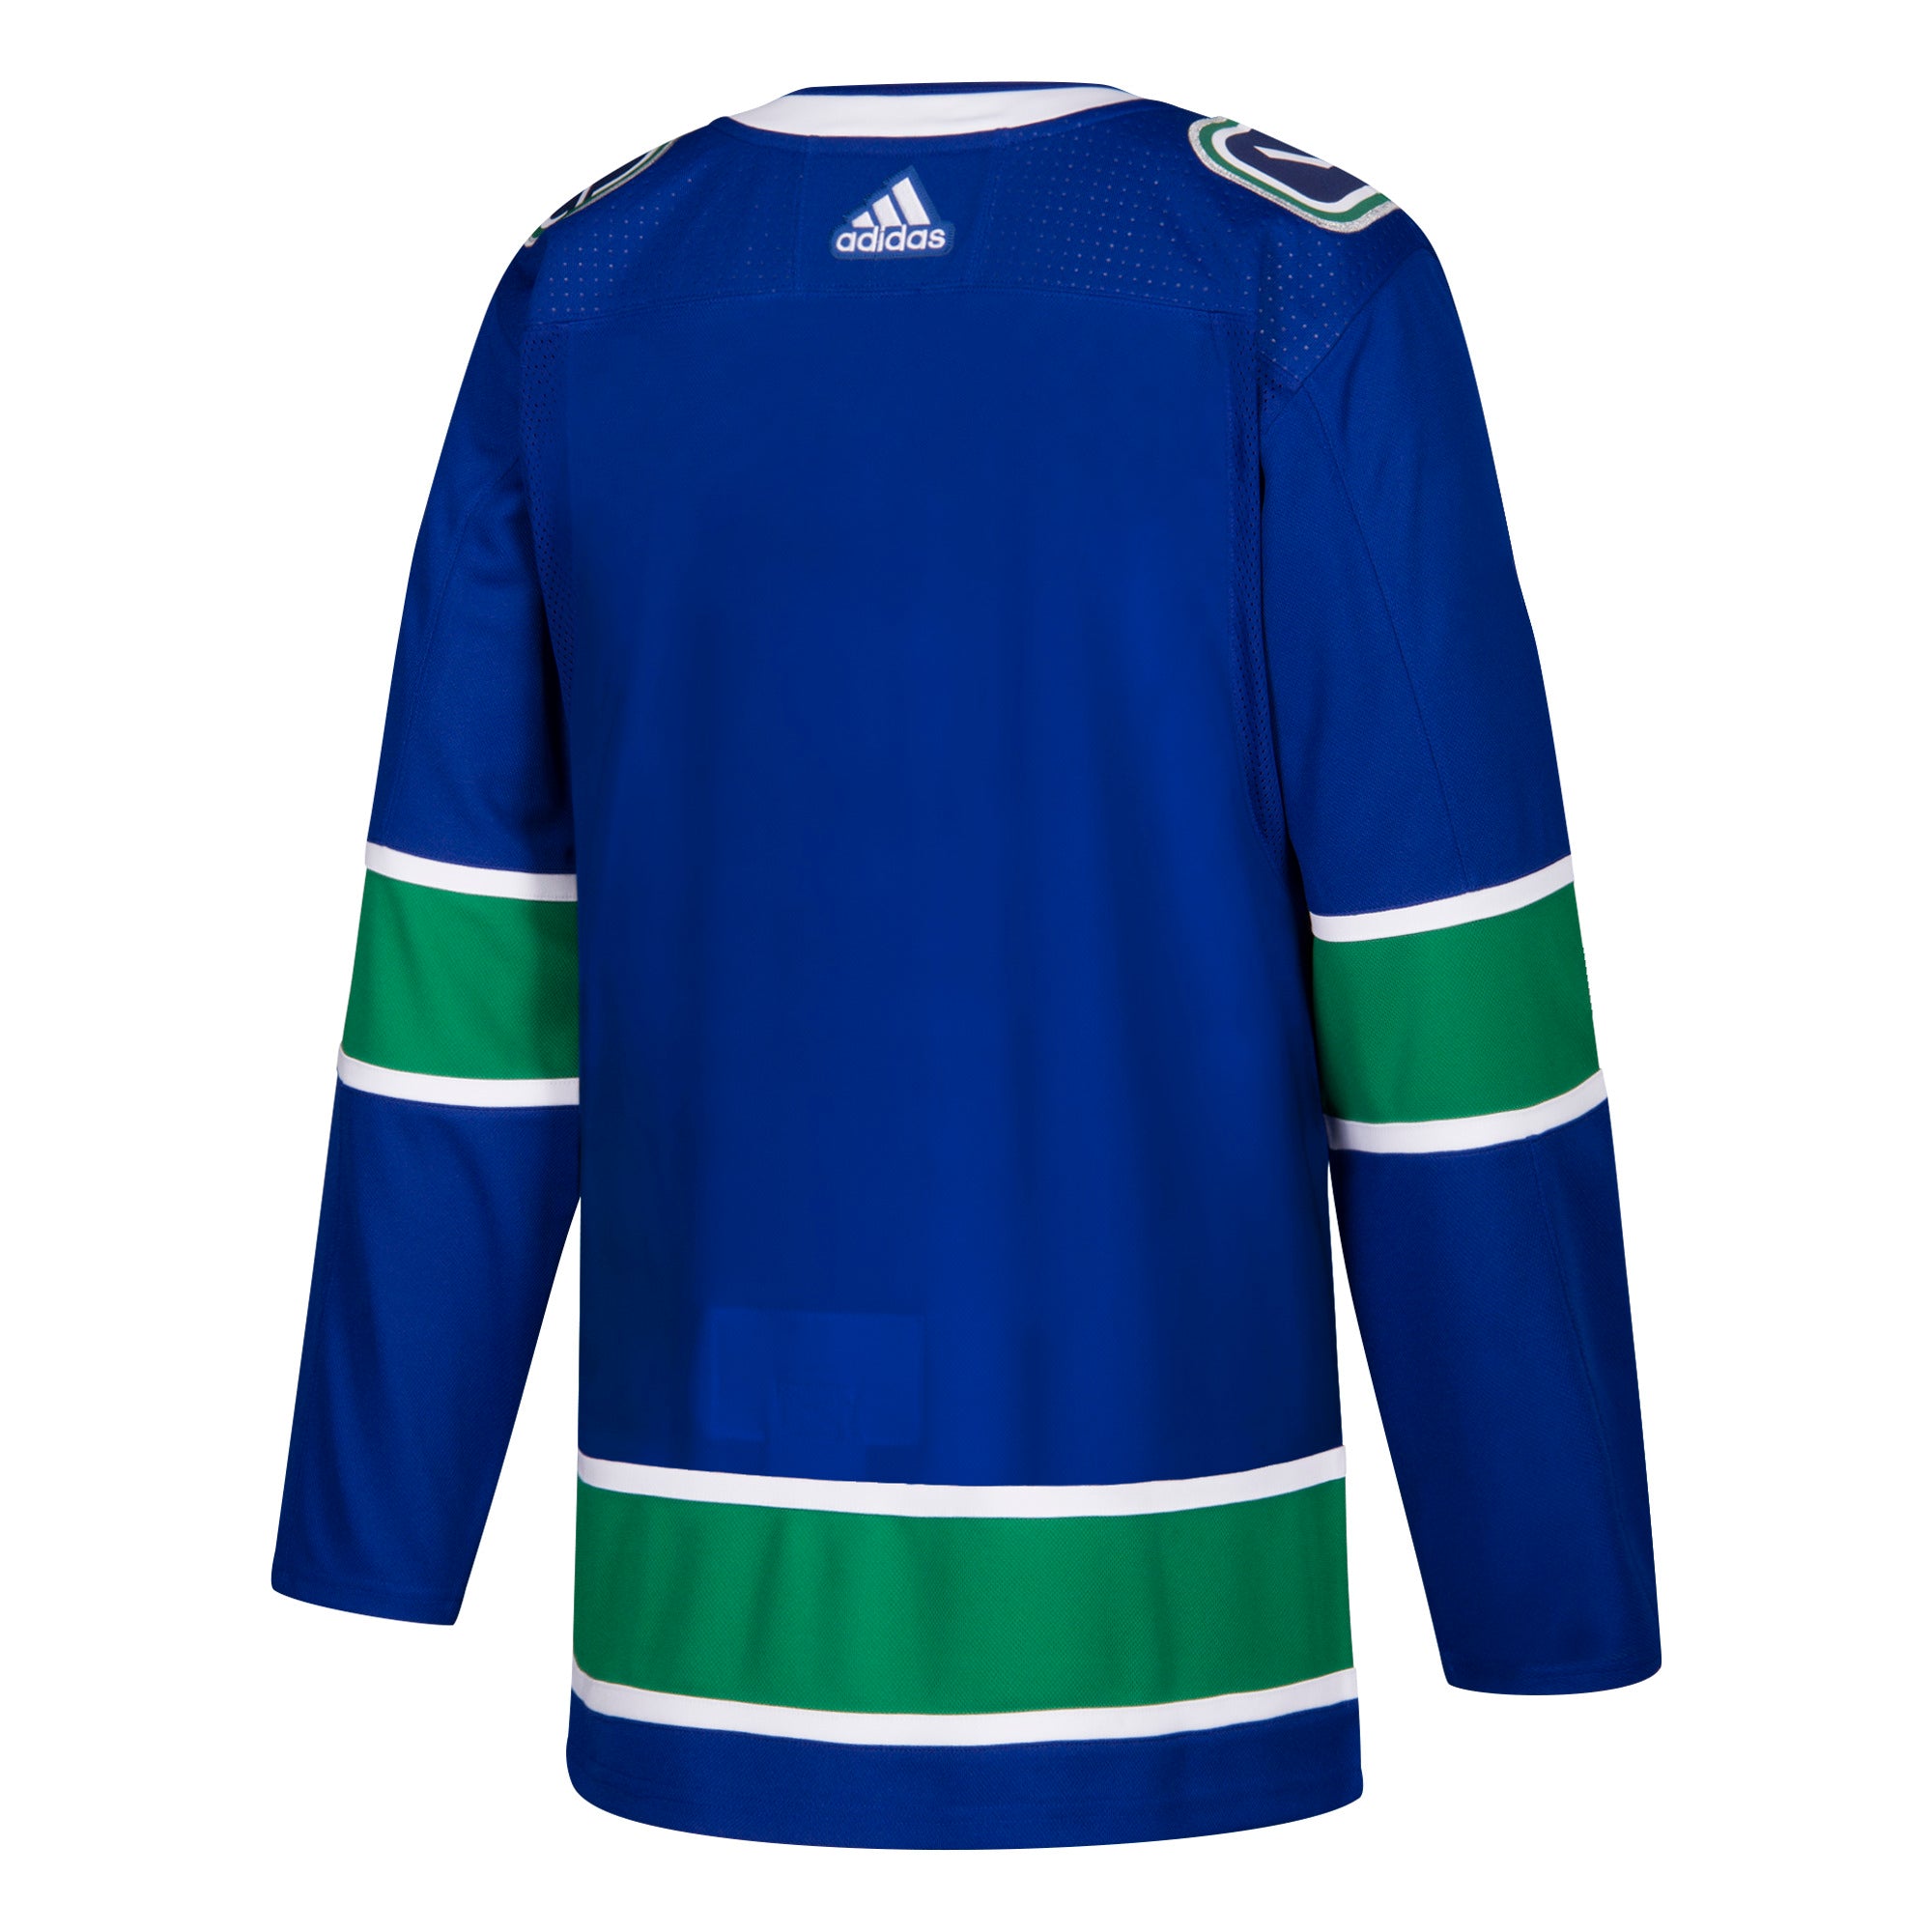 Authentic Adidas Pro NHL Vancouver Canucks Jersey